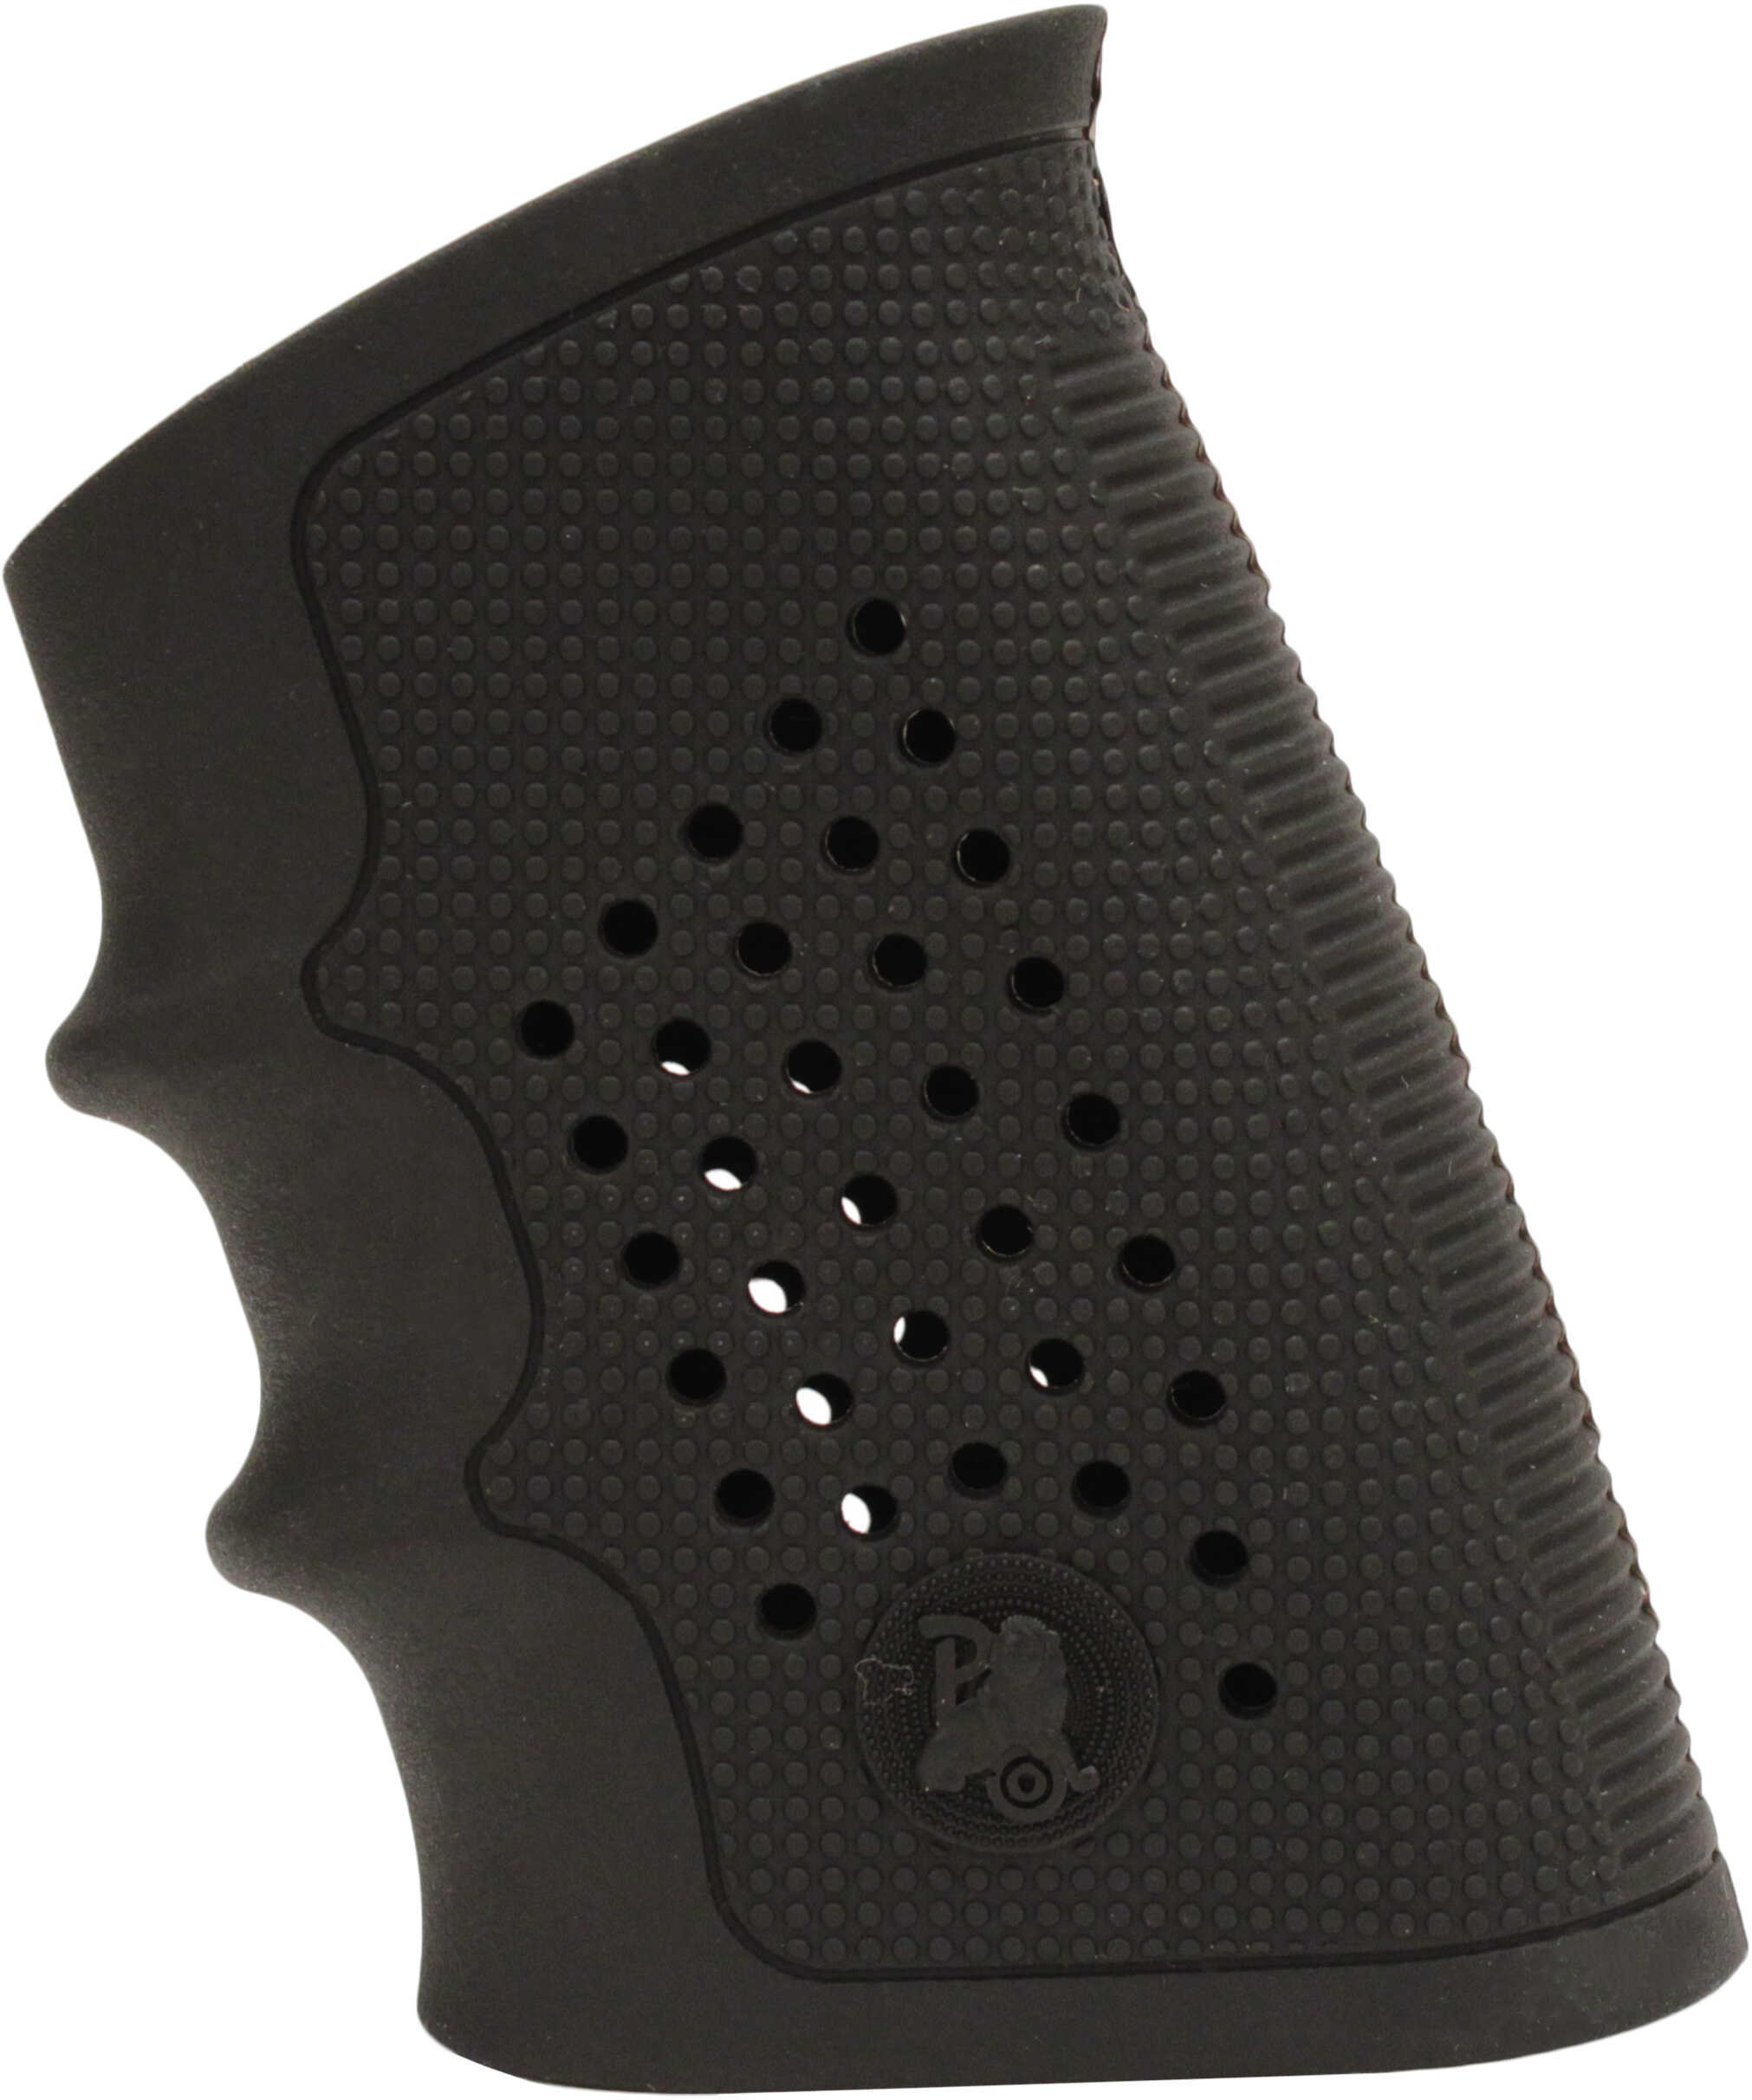 Pachmayr Tactical Grip Glove "Ruger SR9-img-1